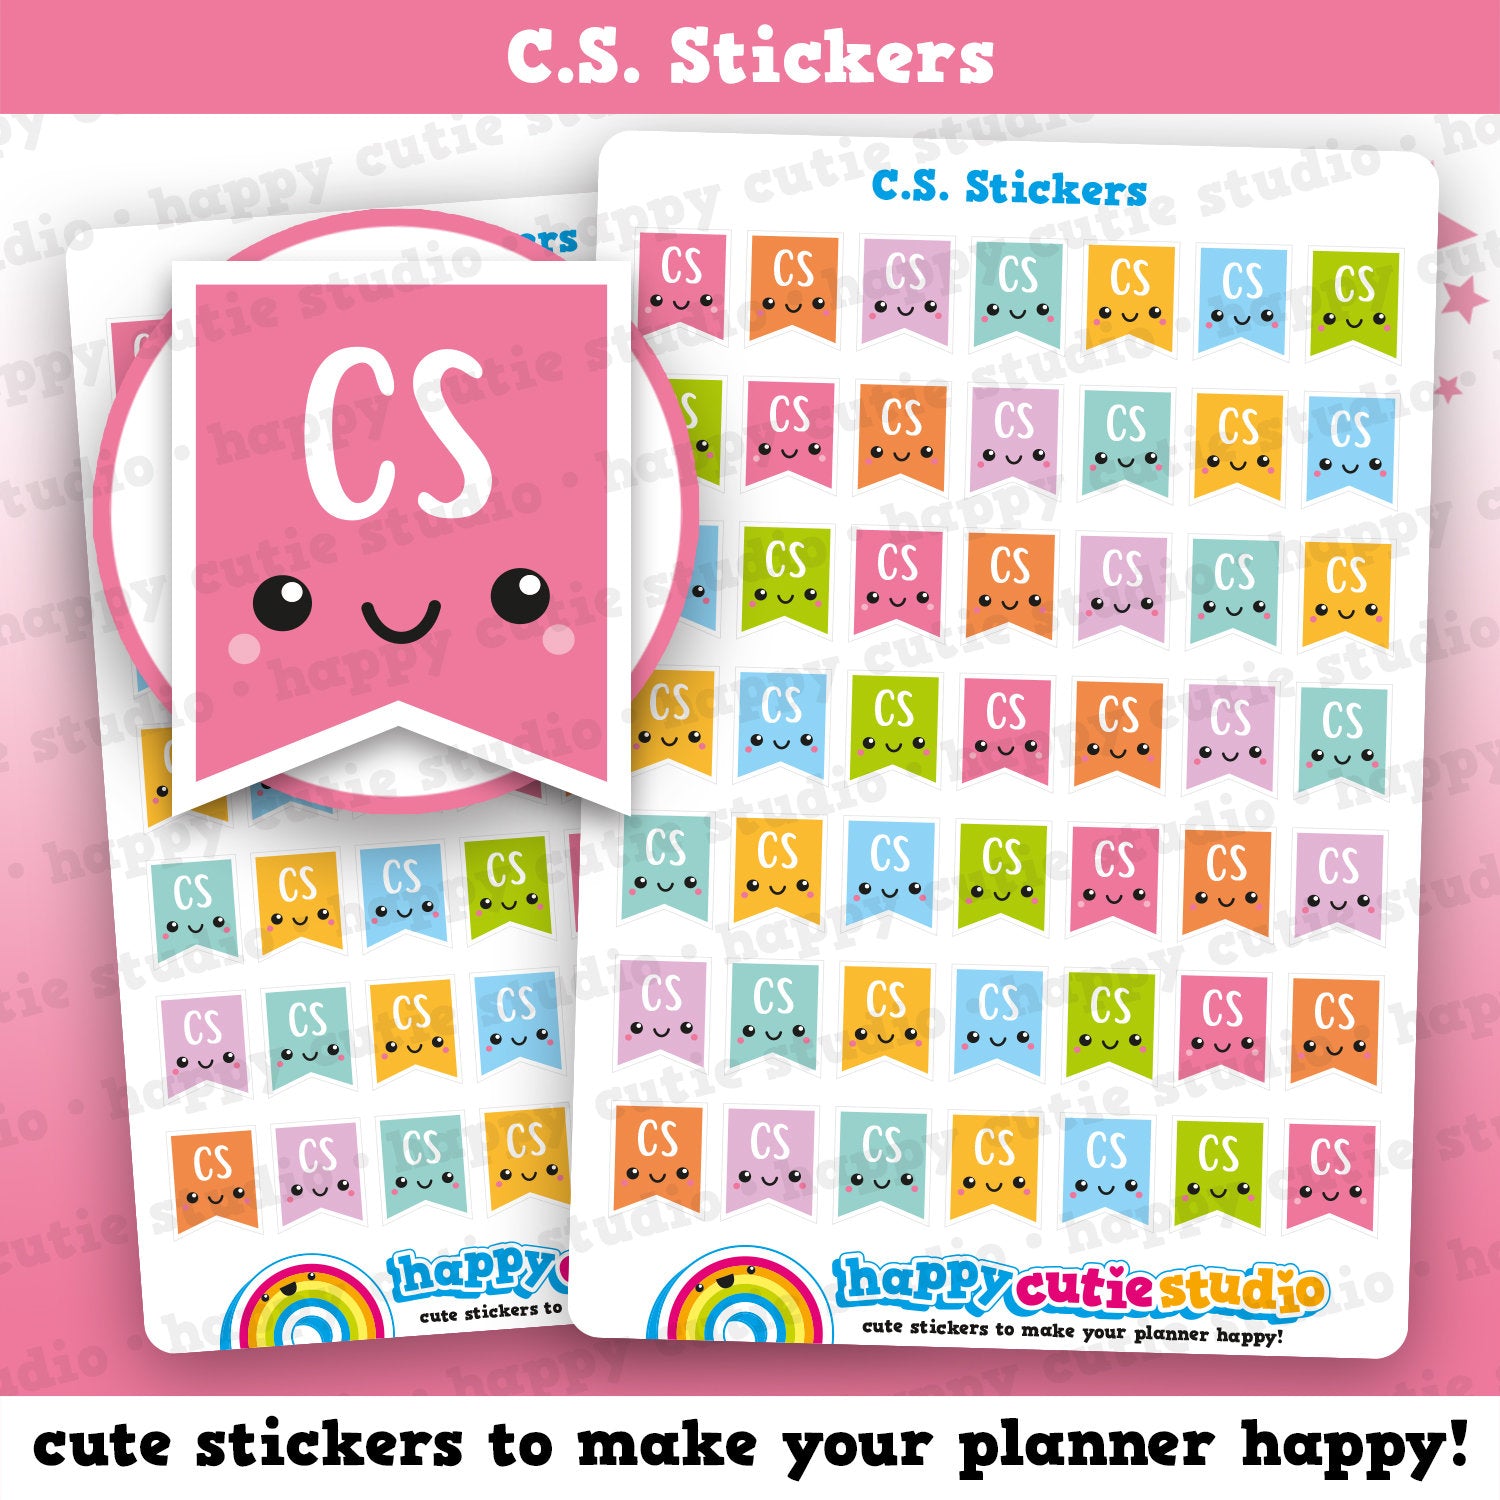 49 Cute C.S. Flags/Child Support/Planner Stickers